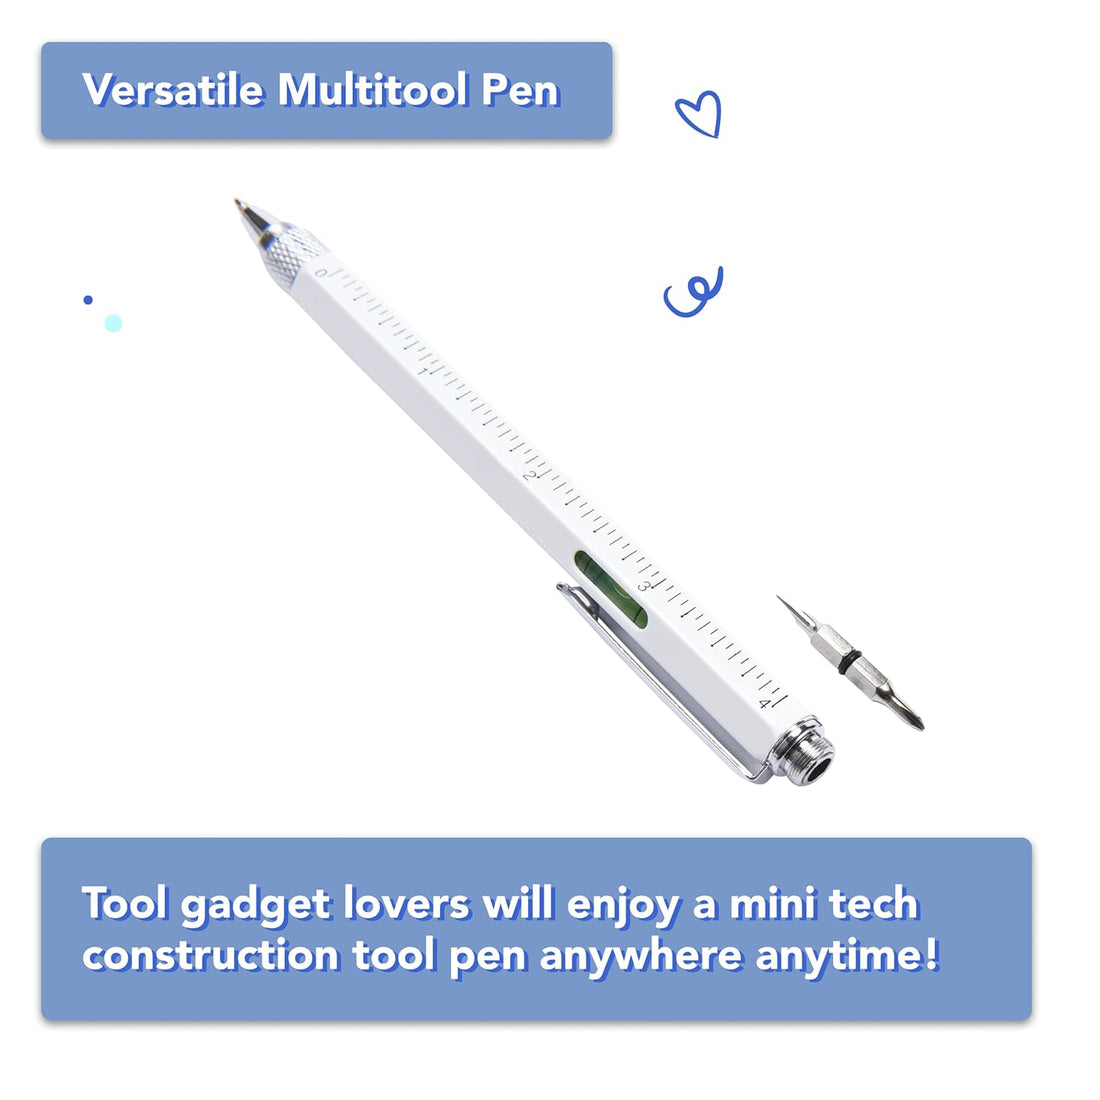 Multitool Construction Pen Gifts and Stocking Stuffers for Men - Engineering Gadget Tools for Electrician, Architect, and Construction Worker - Multi-Use with Pencil, Level Ruler, and Screwdriver